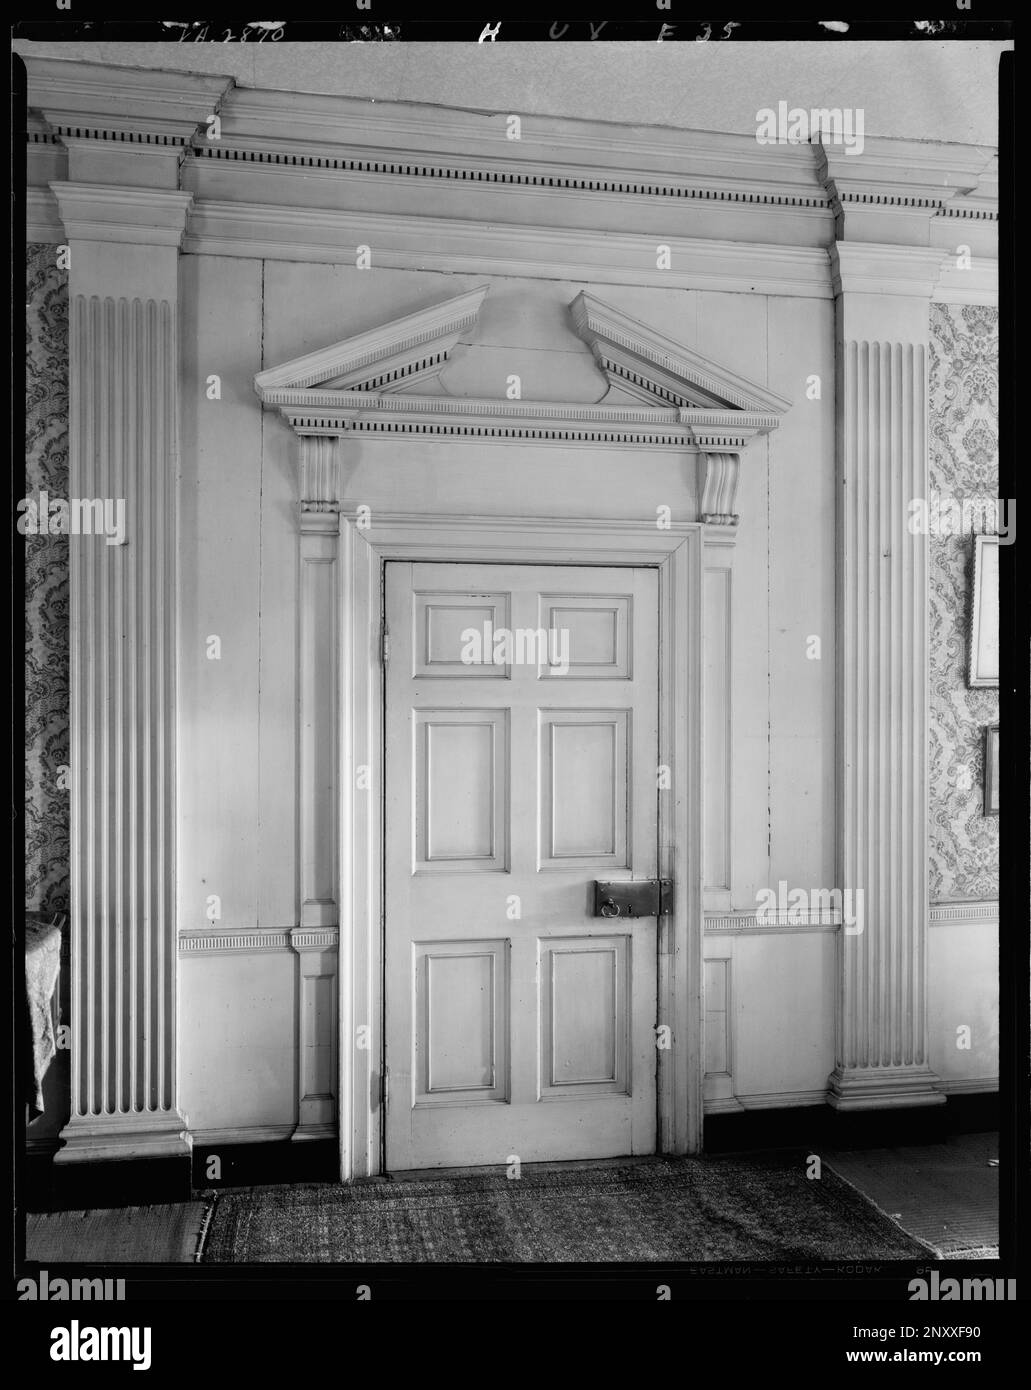 Federal Hill, Fredericksburg, Virginia. Carnegie Survey of the Architecture of the South. Stati Uniti Virginia Fredericksburg, Doors & Doorways, Moldings, Drawing Rooms. Foto Stock